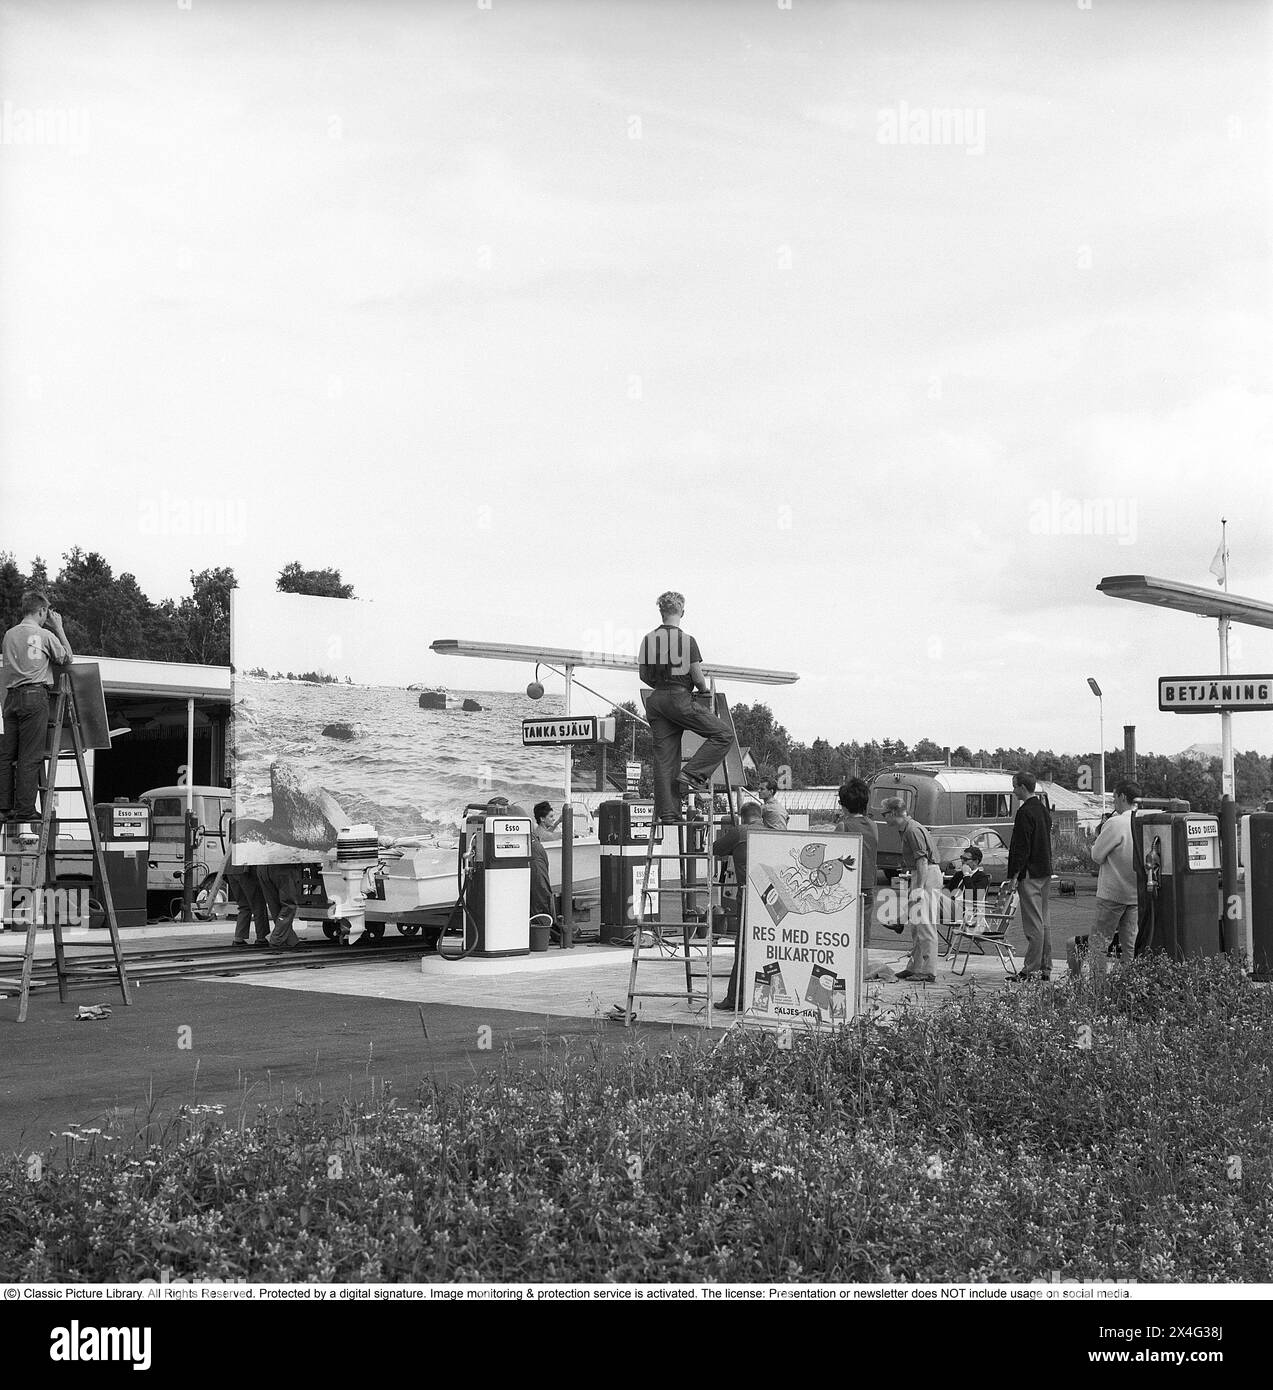 Esso gas station in 1963. The company Svenska Esso was a brand in Sweden between the years 1939 to 1987, when the stations changed their name to the name of the new owner, Statoil. At the gas station, a commercial is being filmed where a motorboat stands by the gas pumps. A background representing an ocean is used as a background. Kristoffersson ref DC135-9 Stock Photo